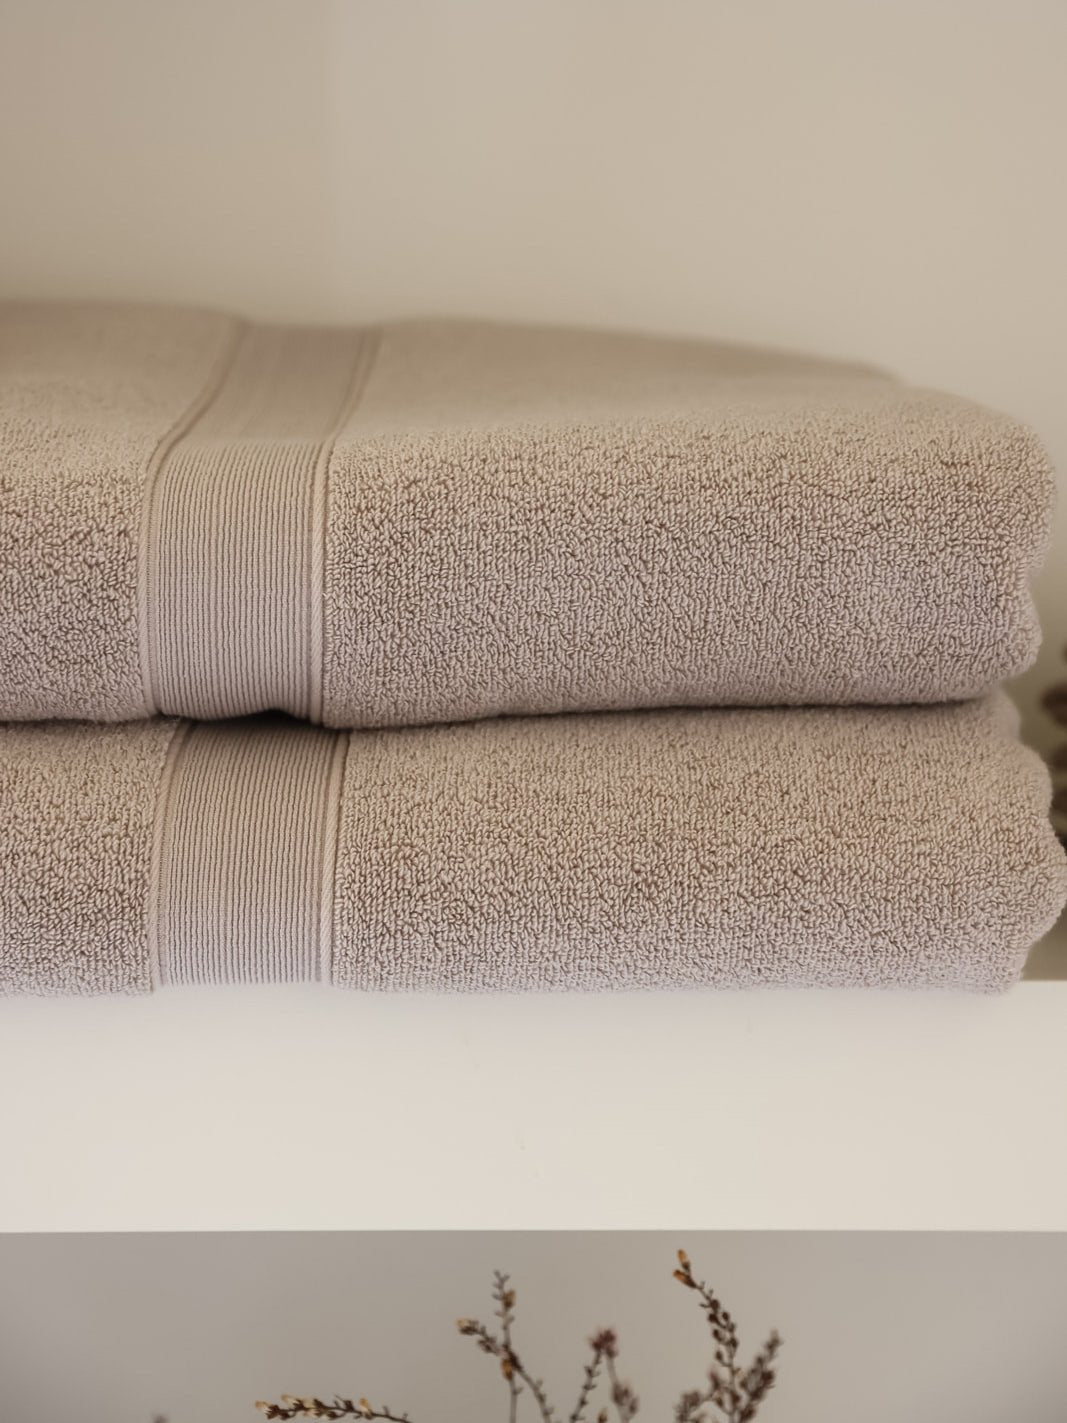 Close up of folded sand luxe bath towels on shelf 